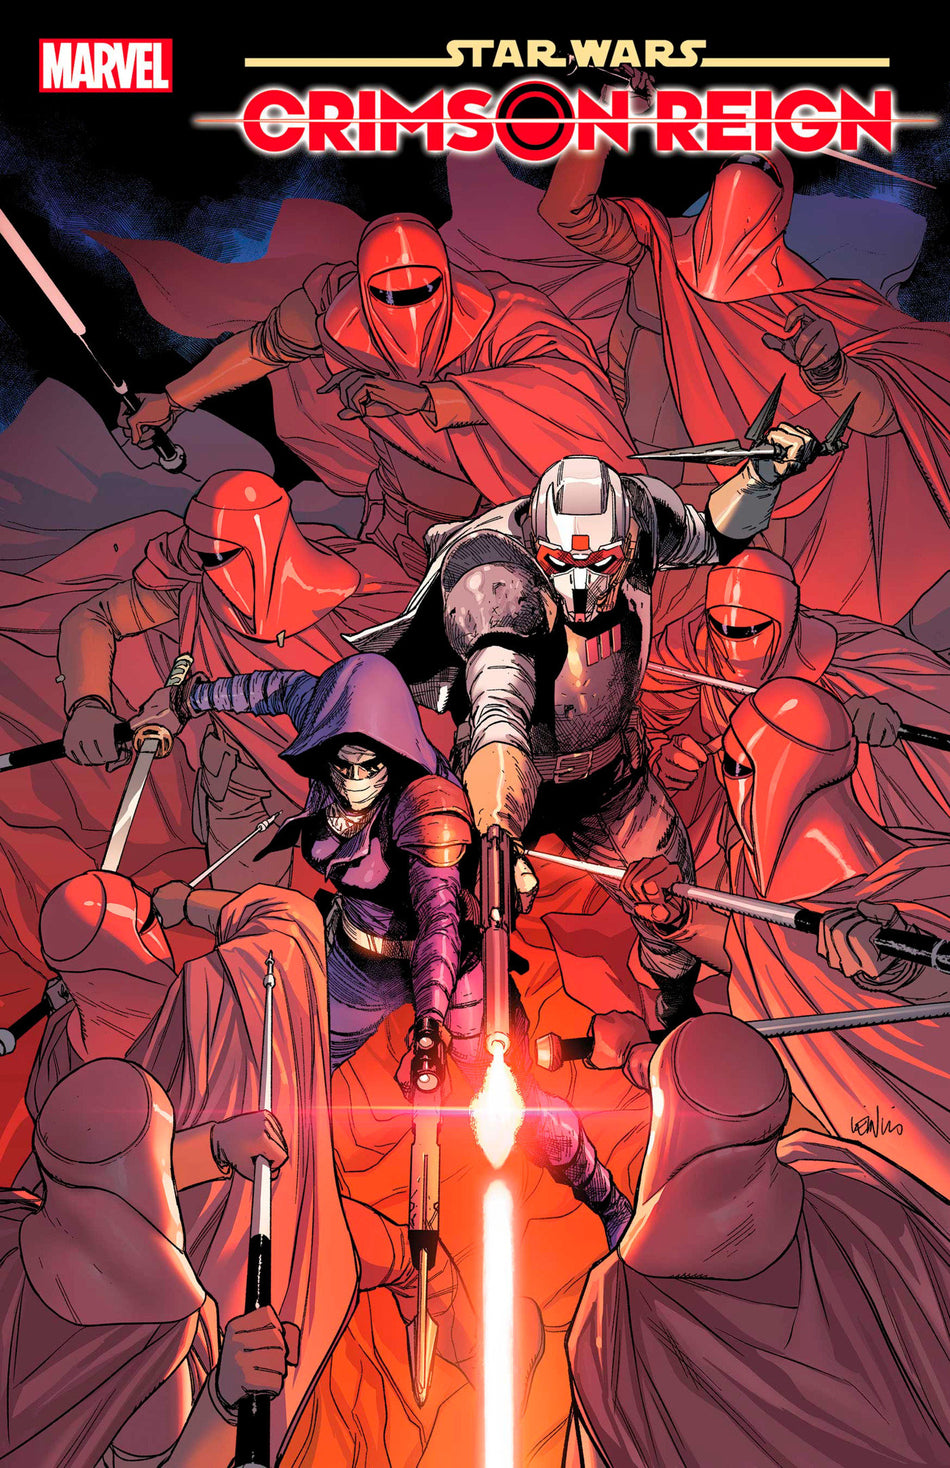 Image of Star Wars Crimson Reign 2 comic sold by Stronghold Collectibles.